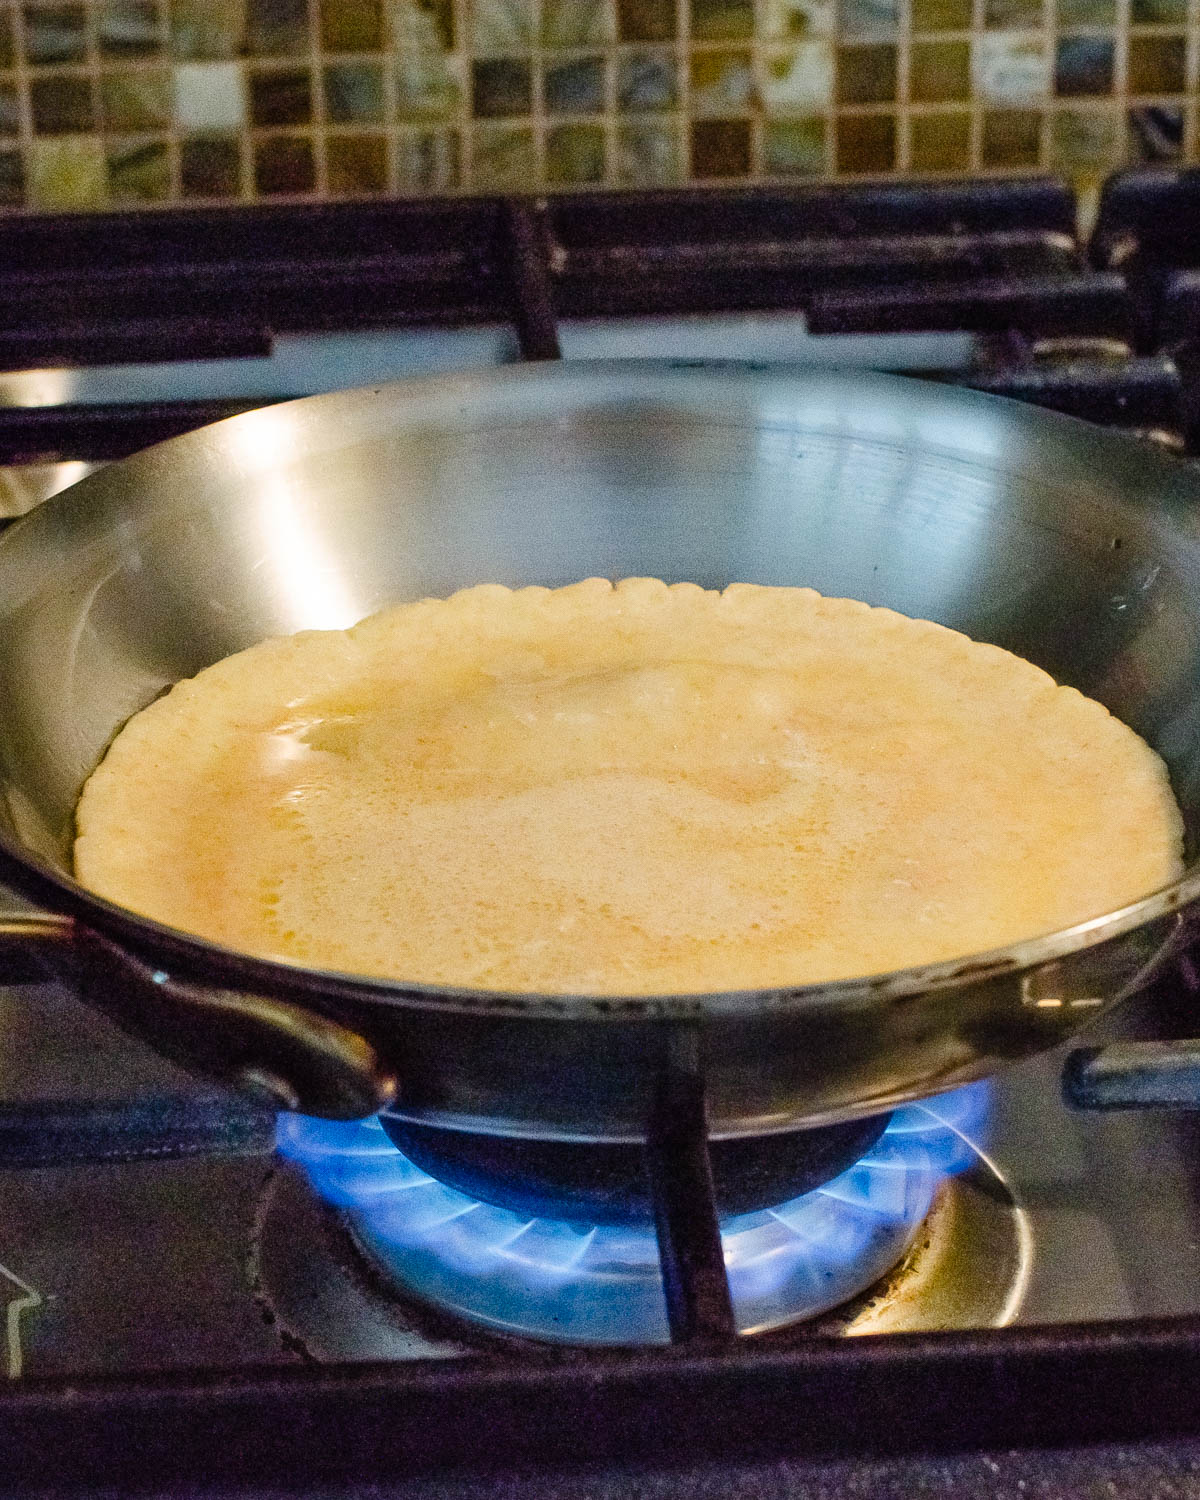 Cooking crepes in a skillet.